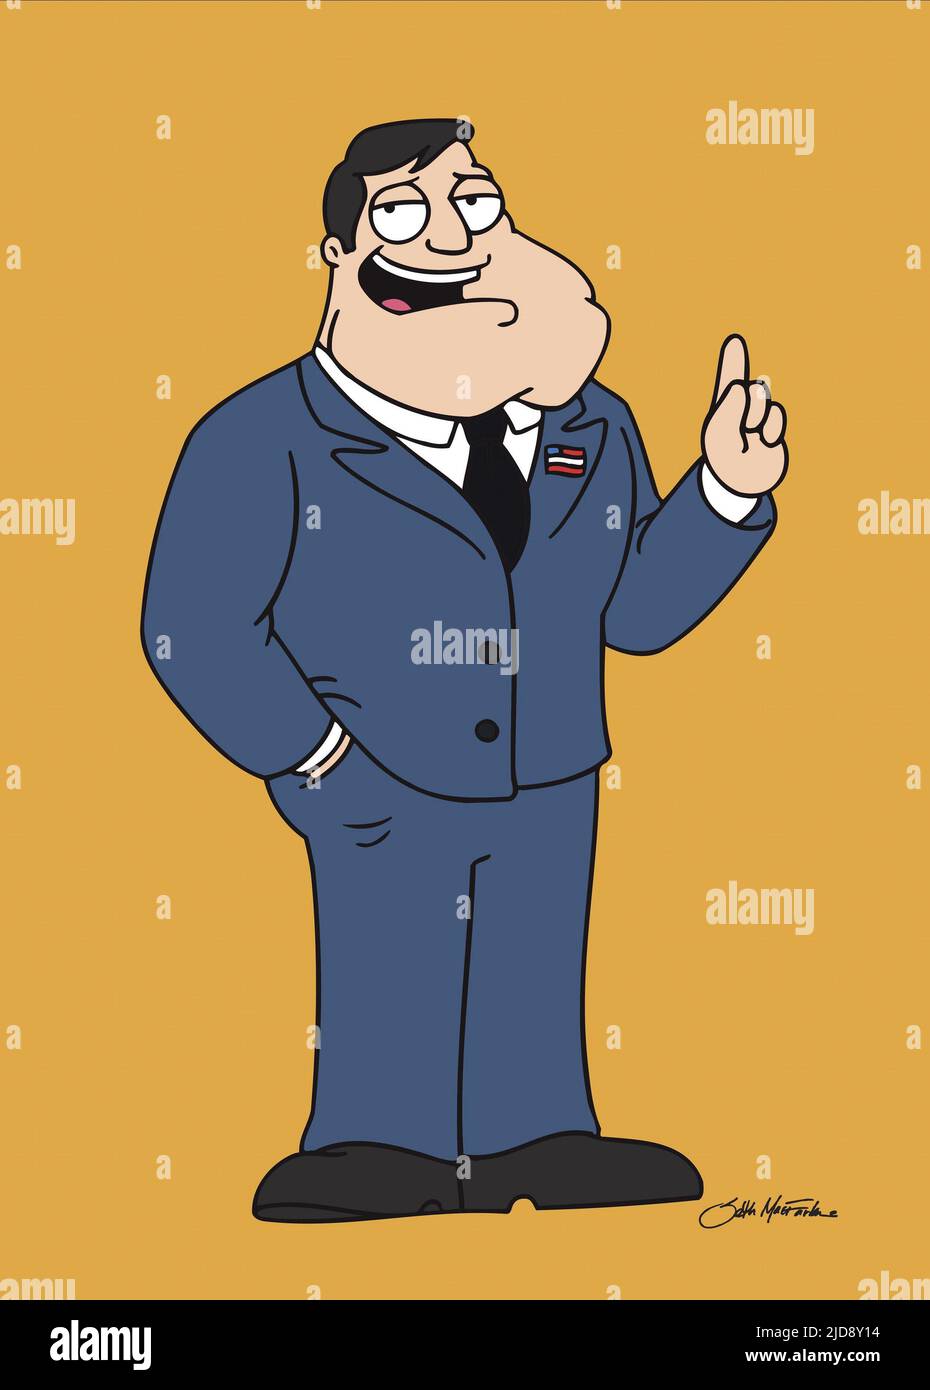 STAN SMITH, AMERICAN DAD!, 2005, Stock Photo